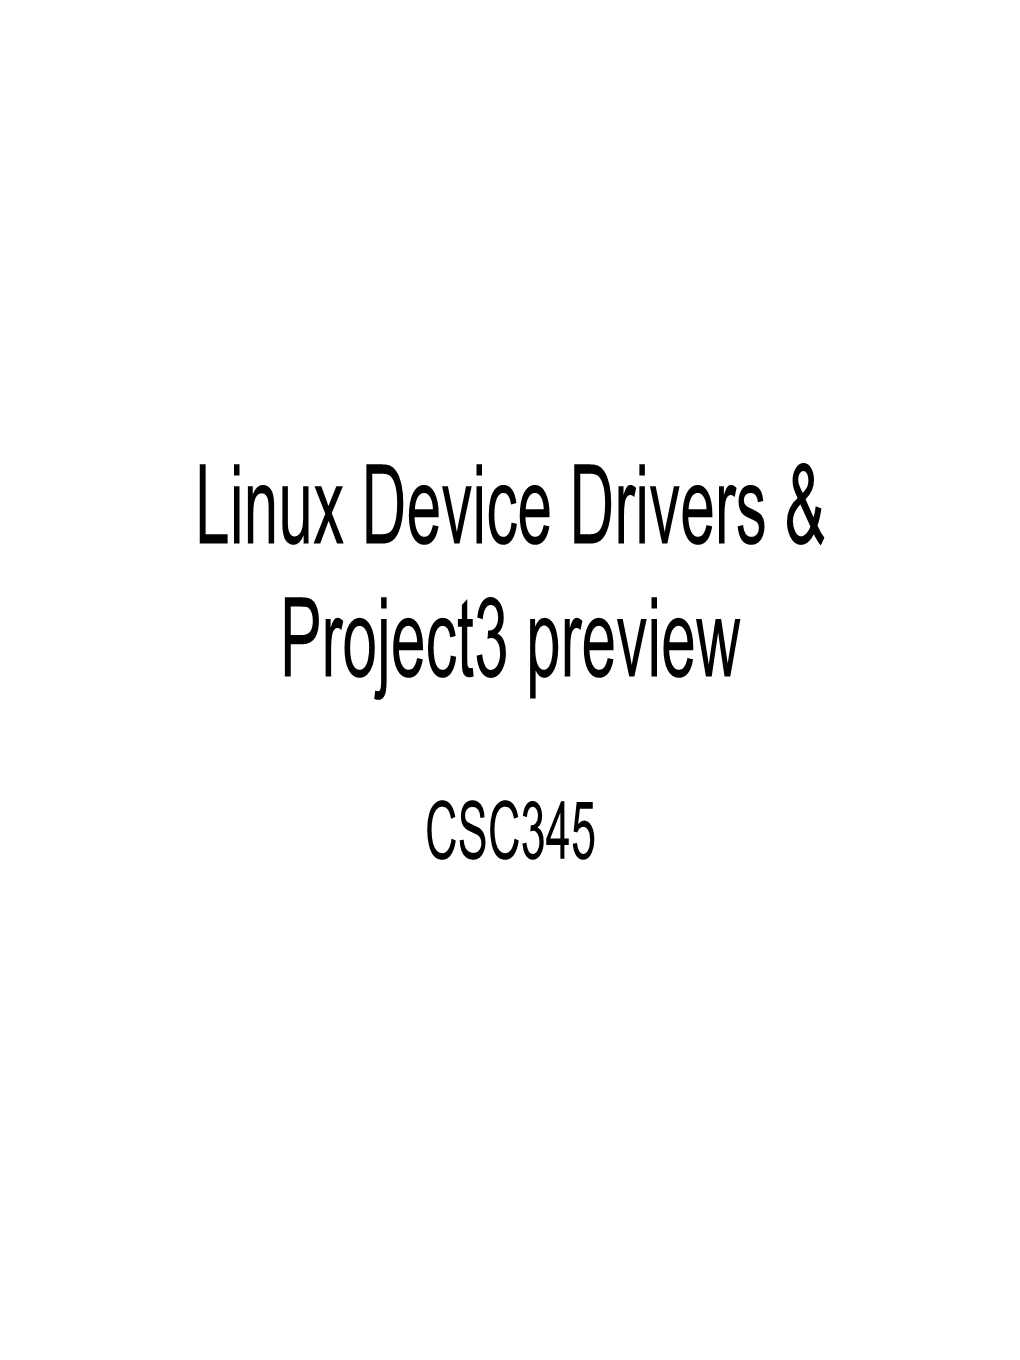 Linux Device Drivers & Project3 Preview